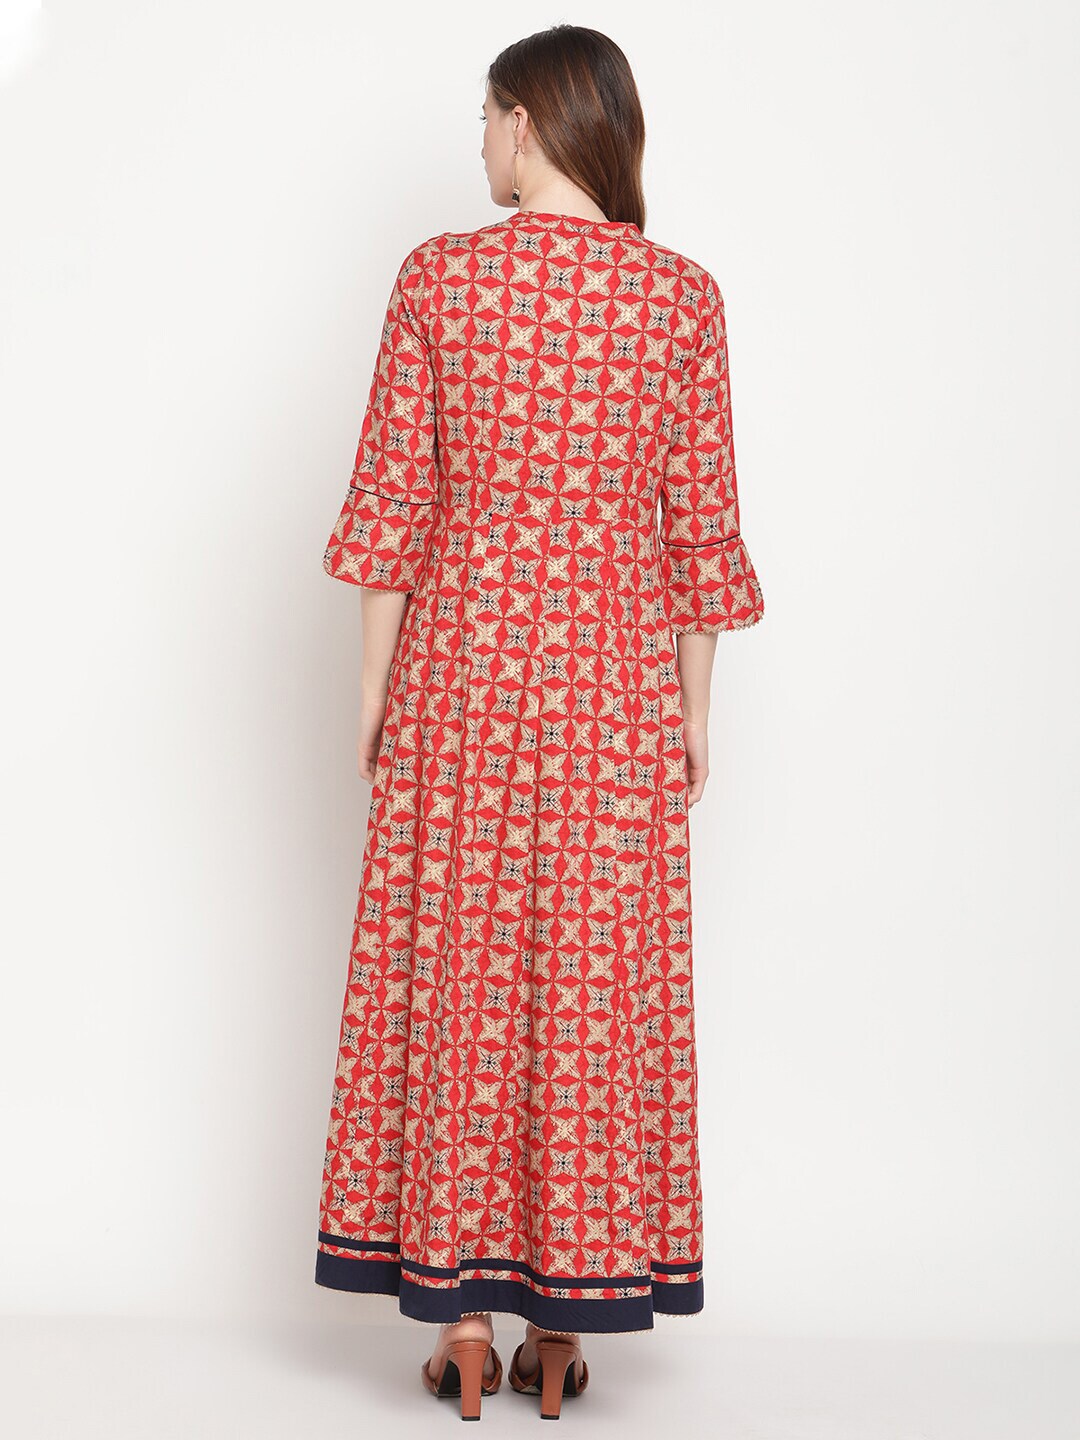 Be Indi Women Red Navy Printed With Contrast Embroidered And Trim Detailing Maxi Dress